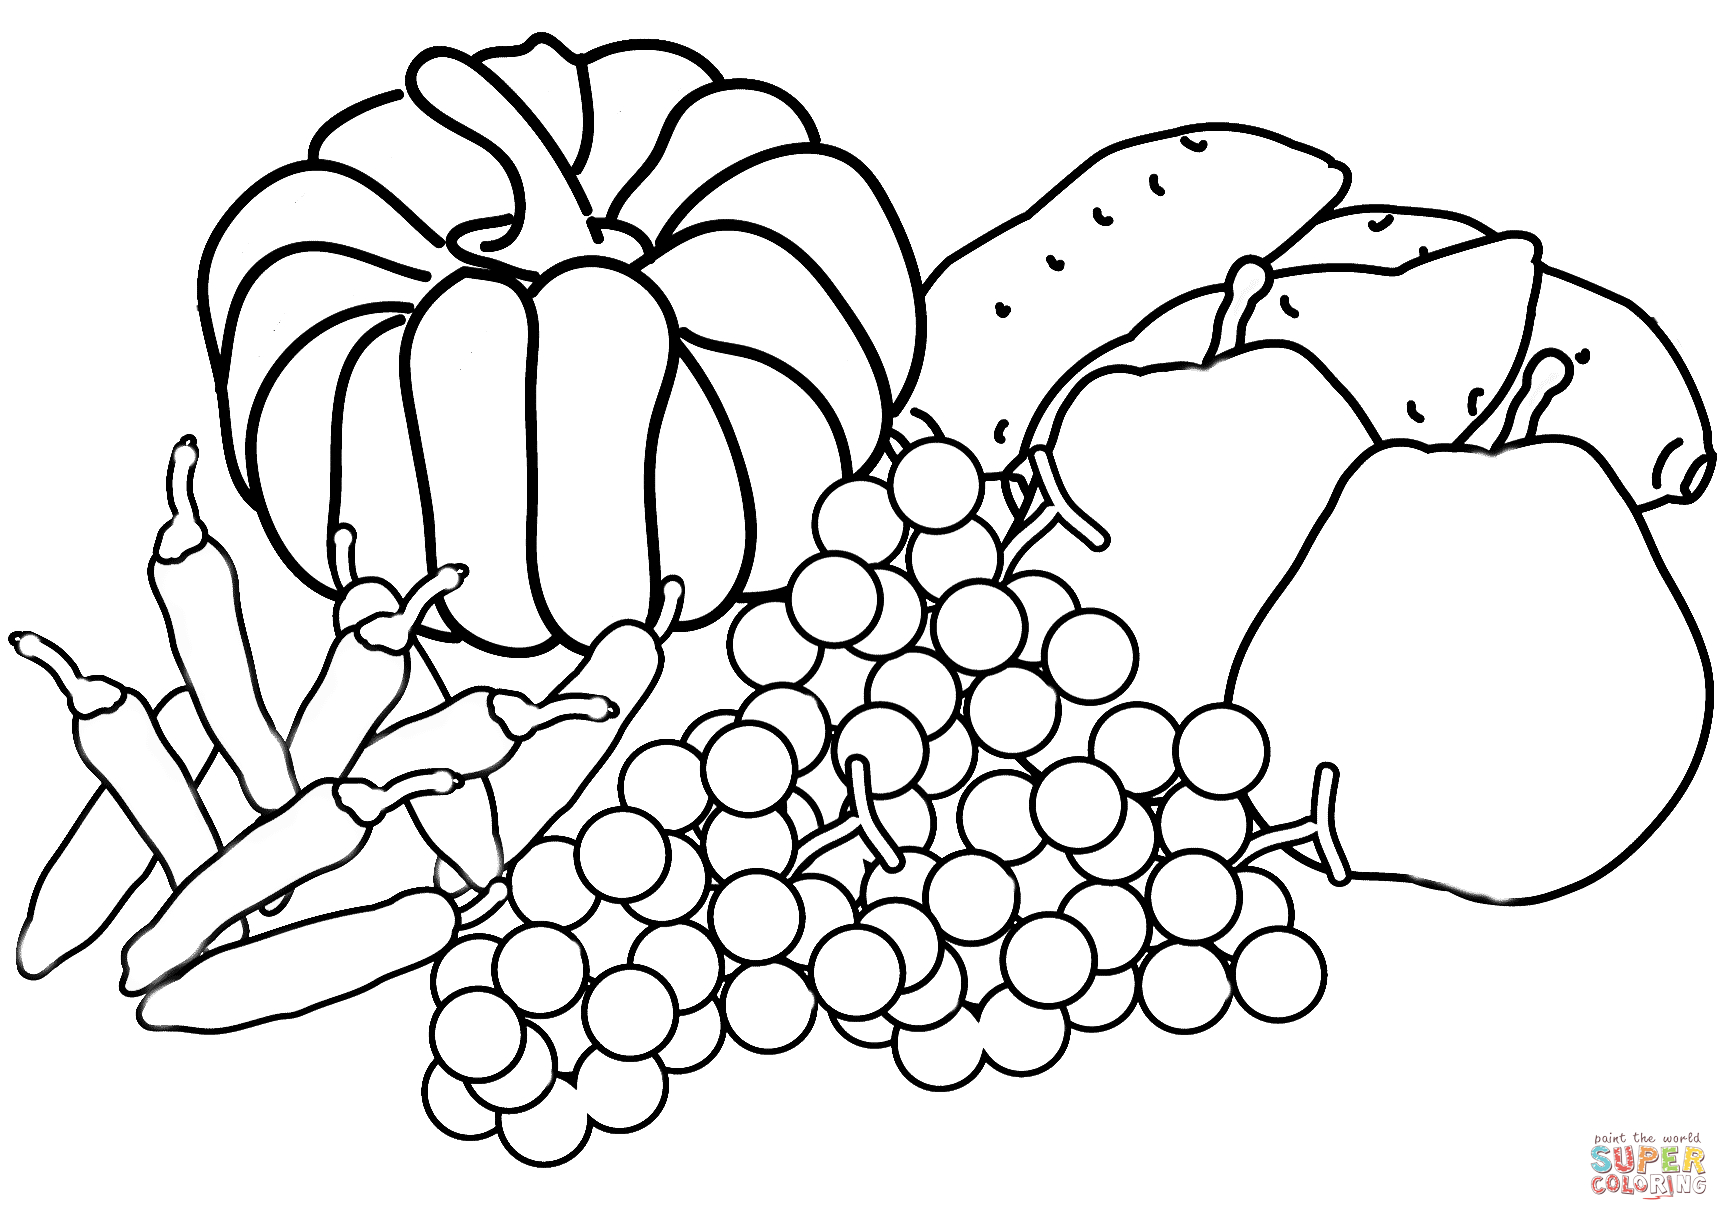 Free Printable Fall Harvest Coloring Pages - Free Printable